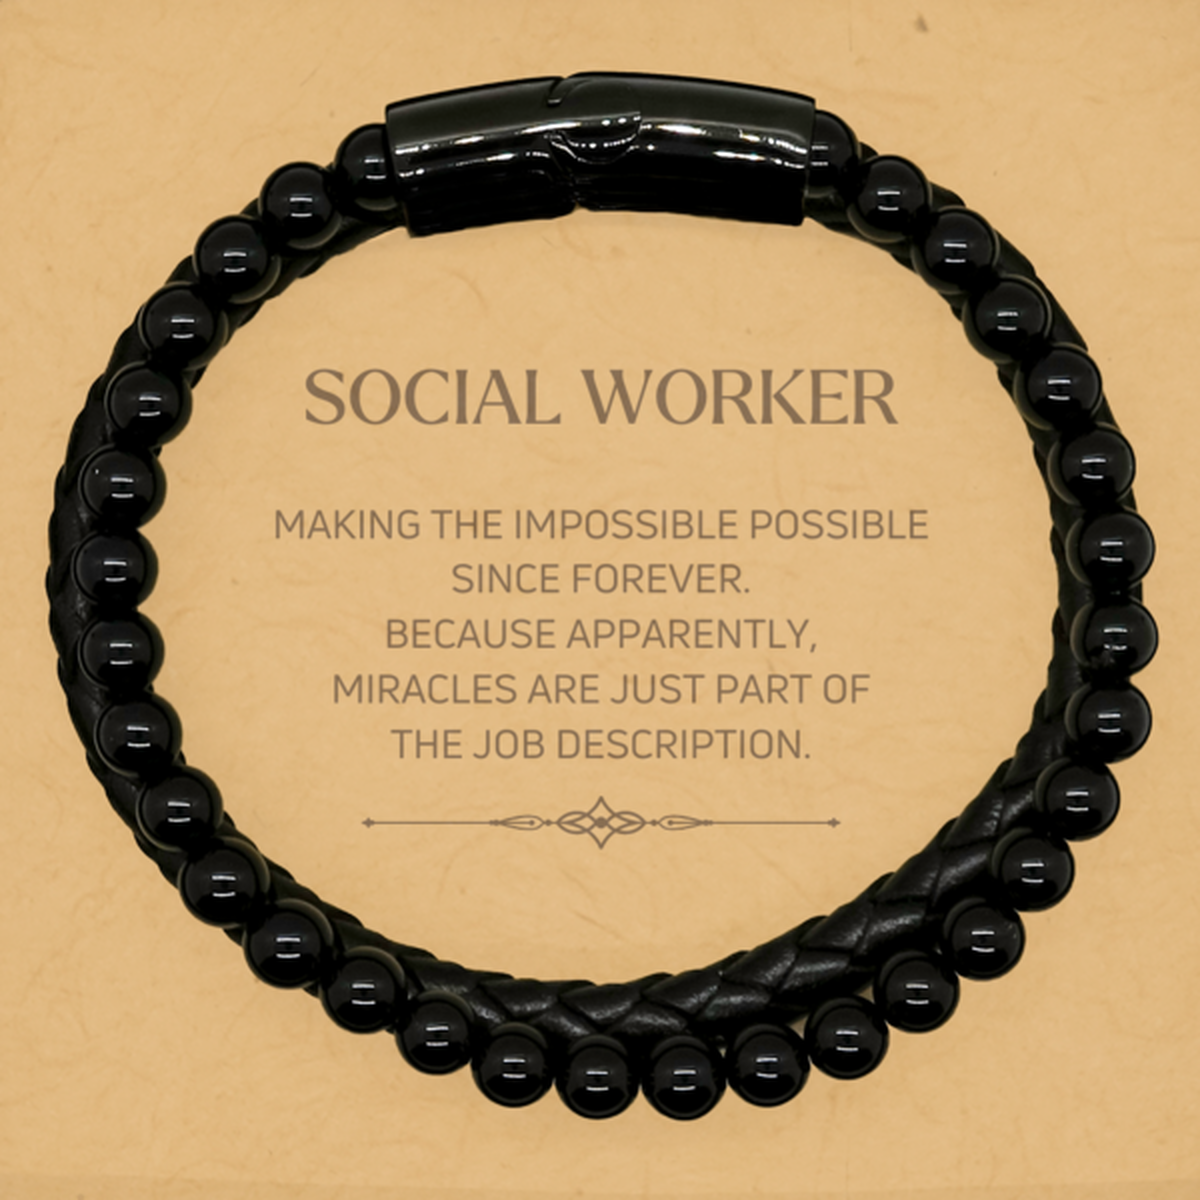 Funny Social Worker Gifts, Miracles are just part of the job description, Inspirational Birthday Stone Leather Bracelets For Social Worker, Men, Women, Coworkers, Friends, Boss